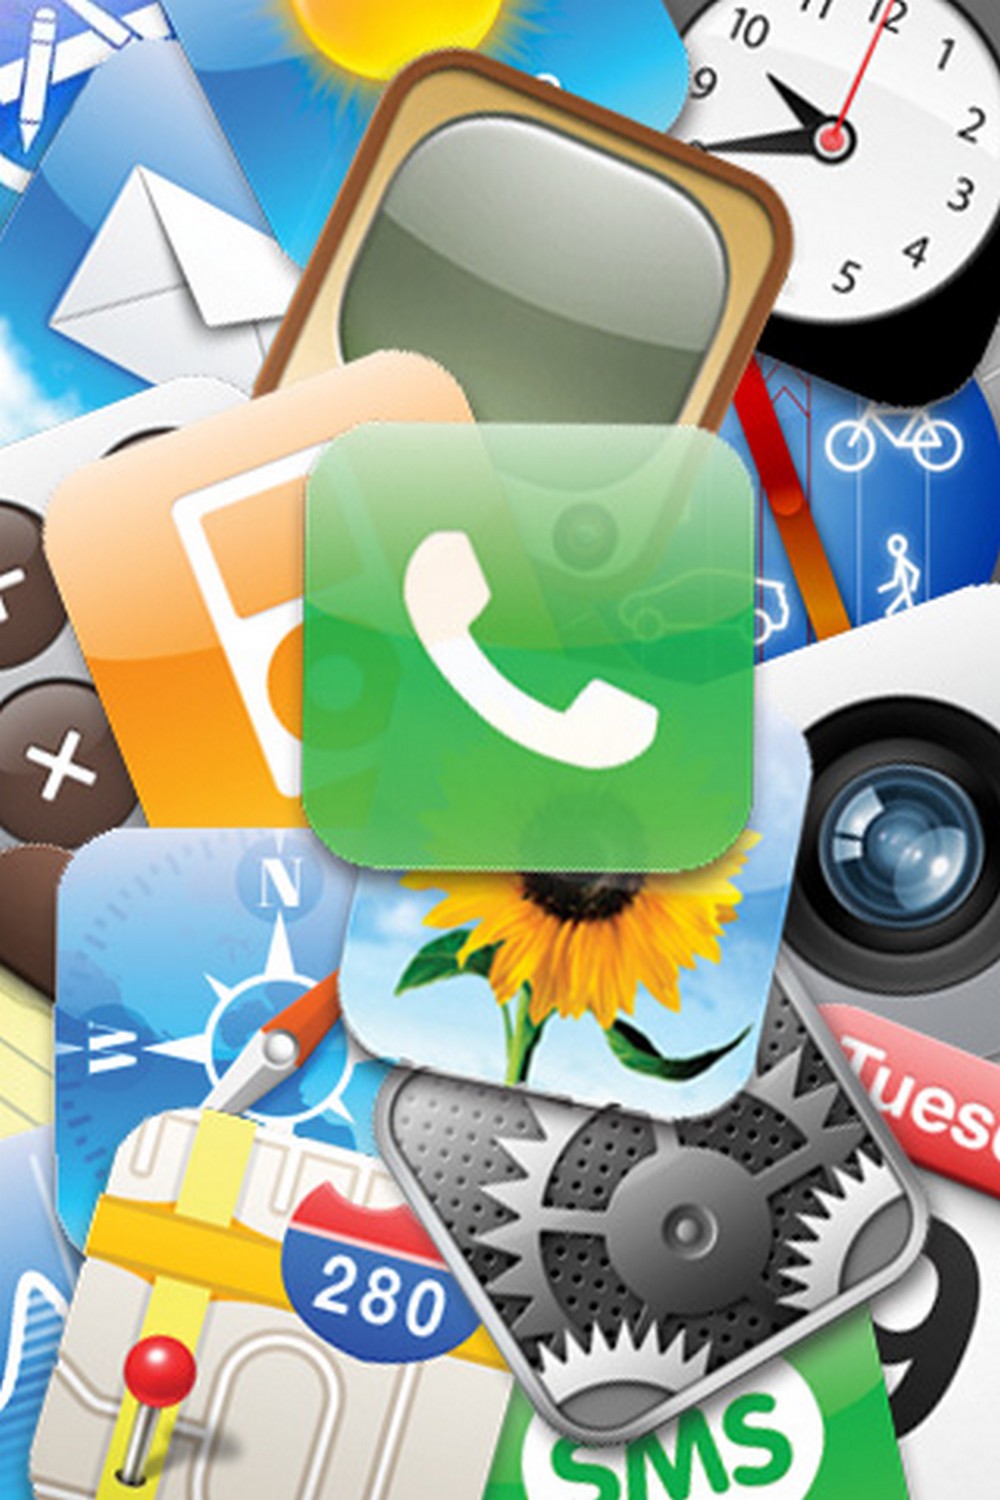 Top Ways To Market An iPhone Application Apps400